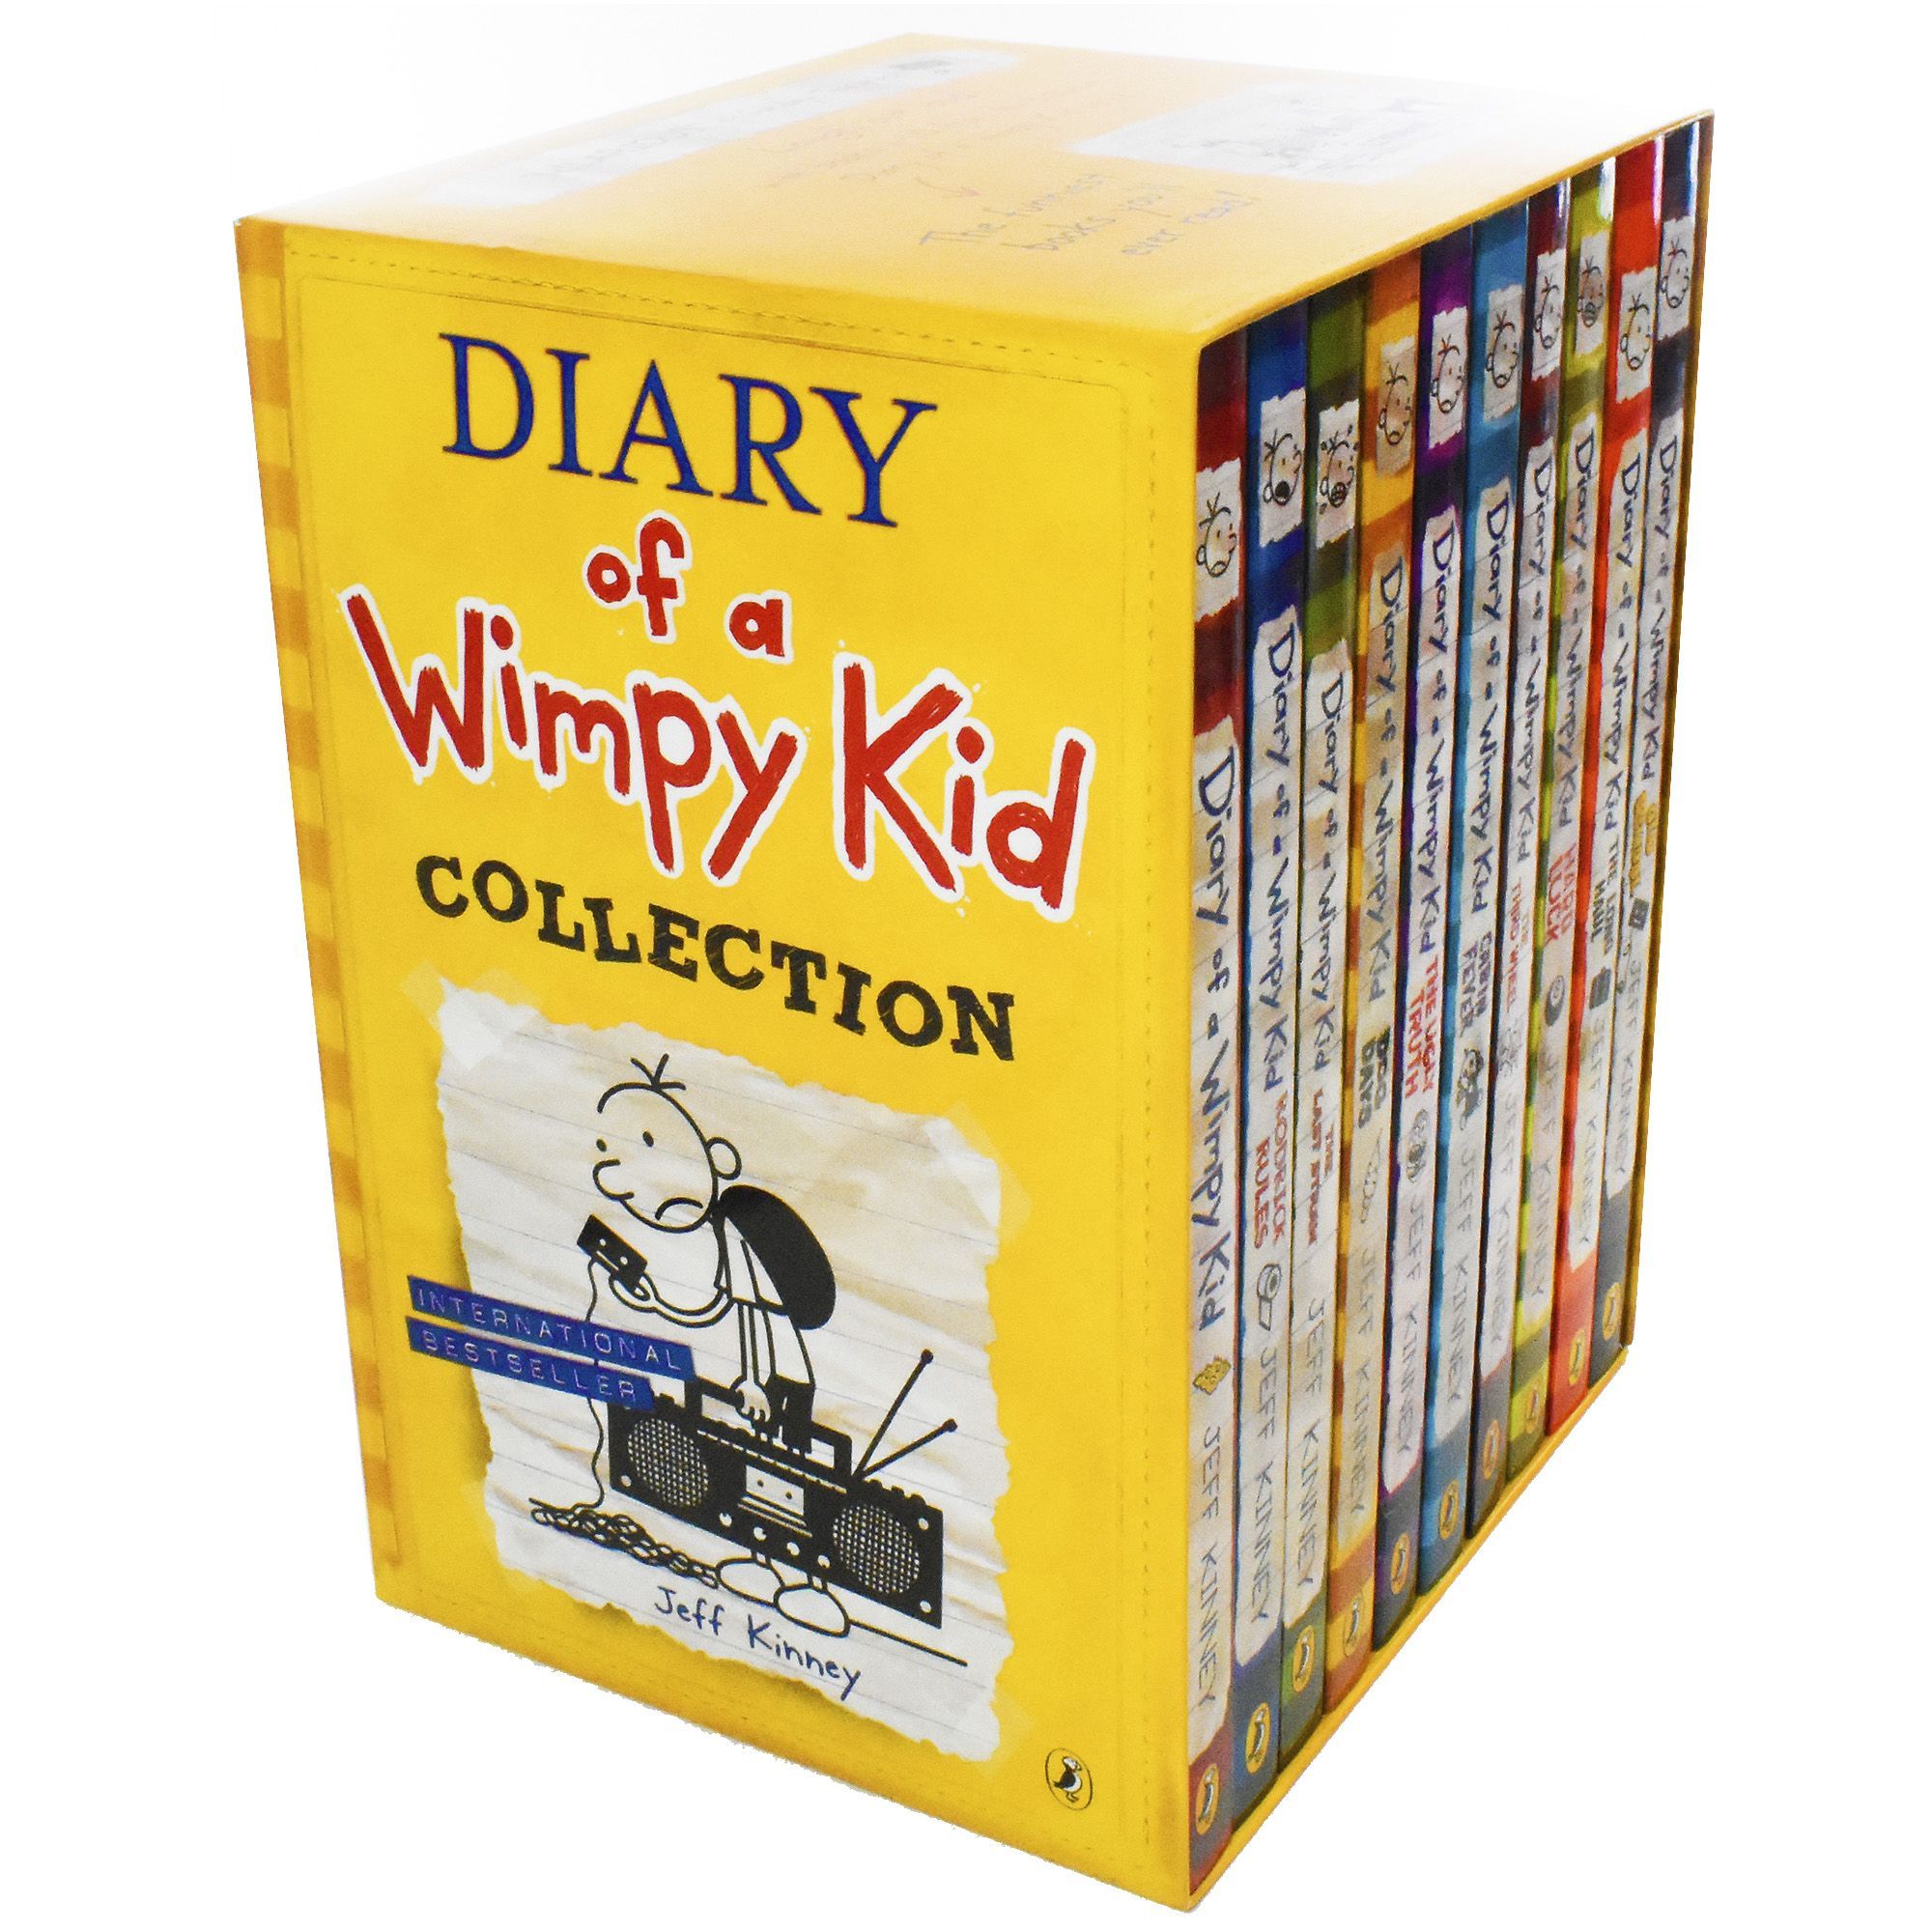 book report for diary of a wimpy kid